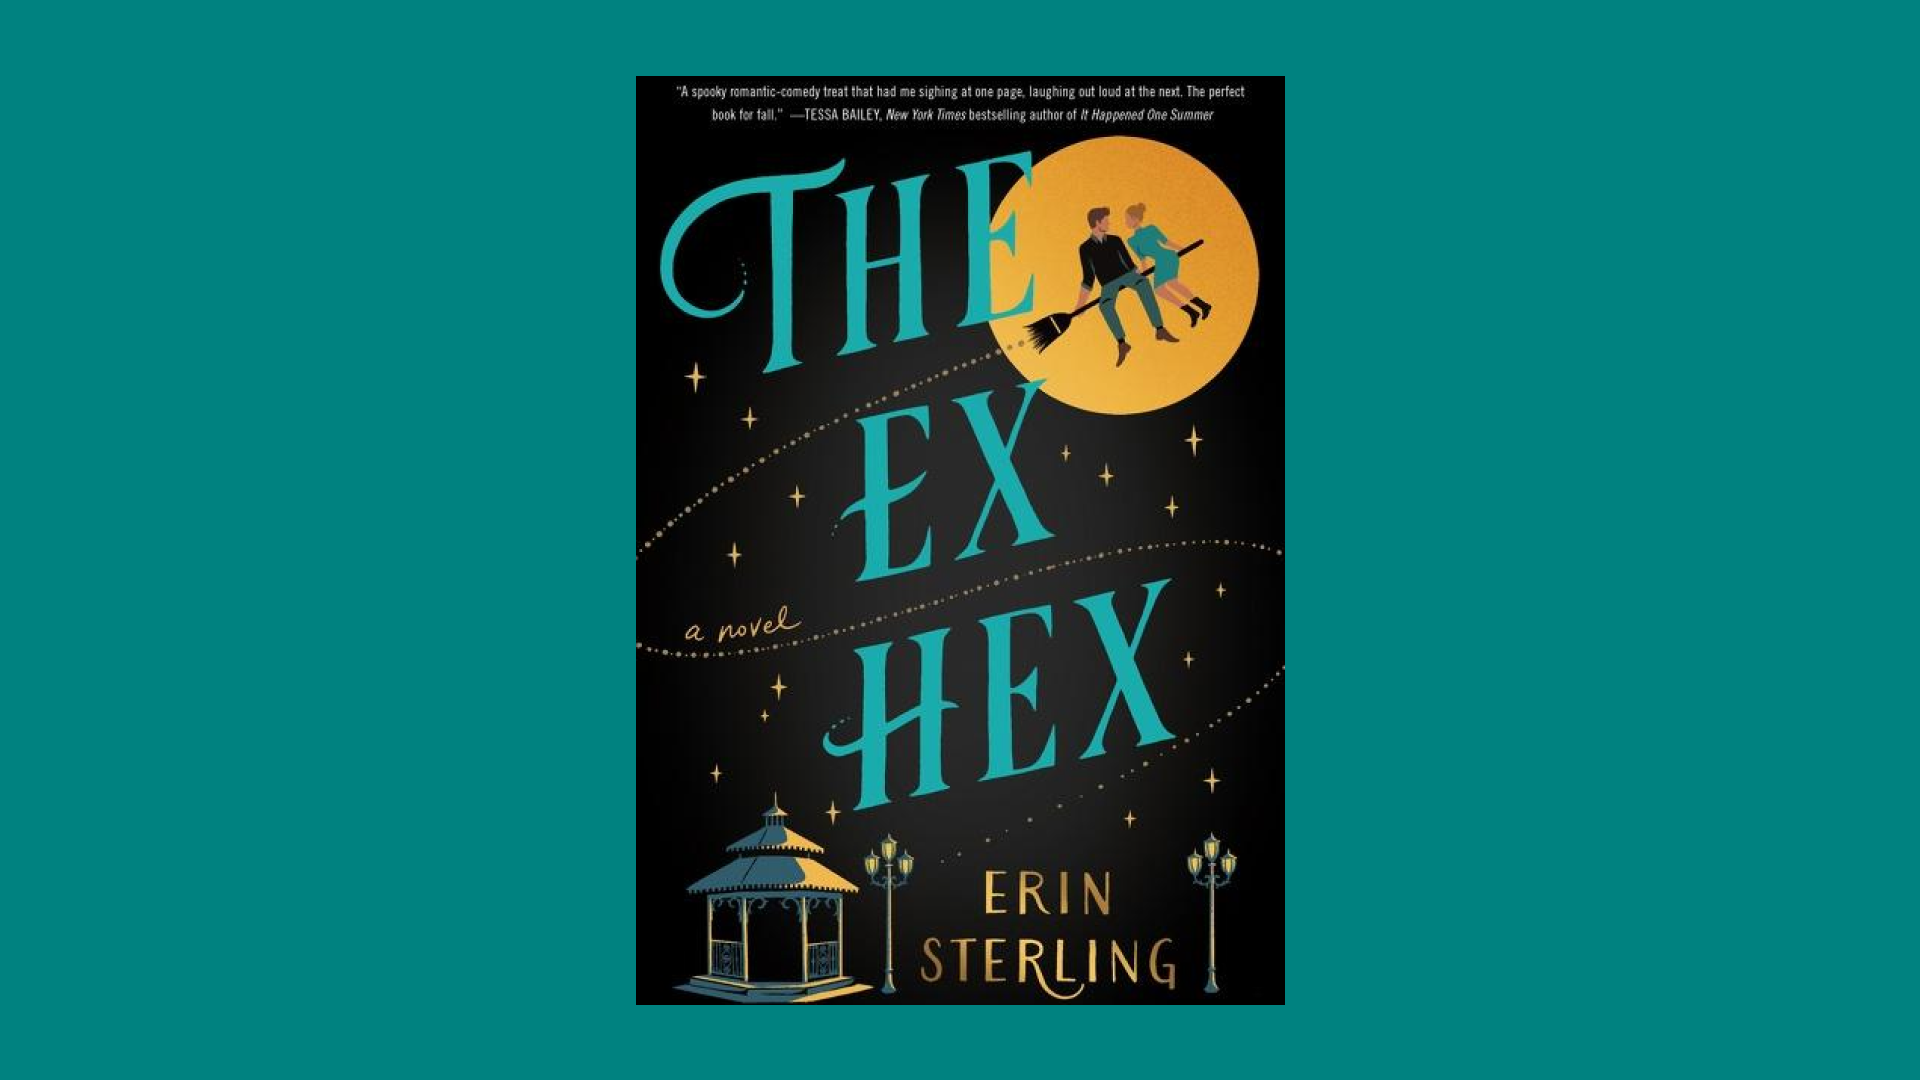 “The Ex Hex” by Erin Sterling